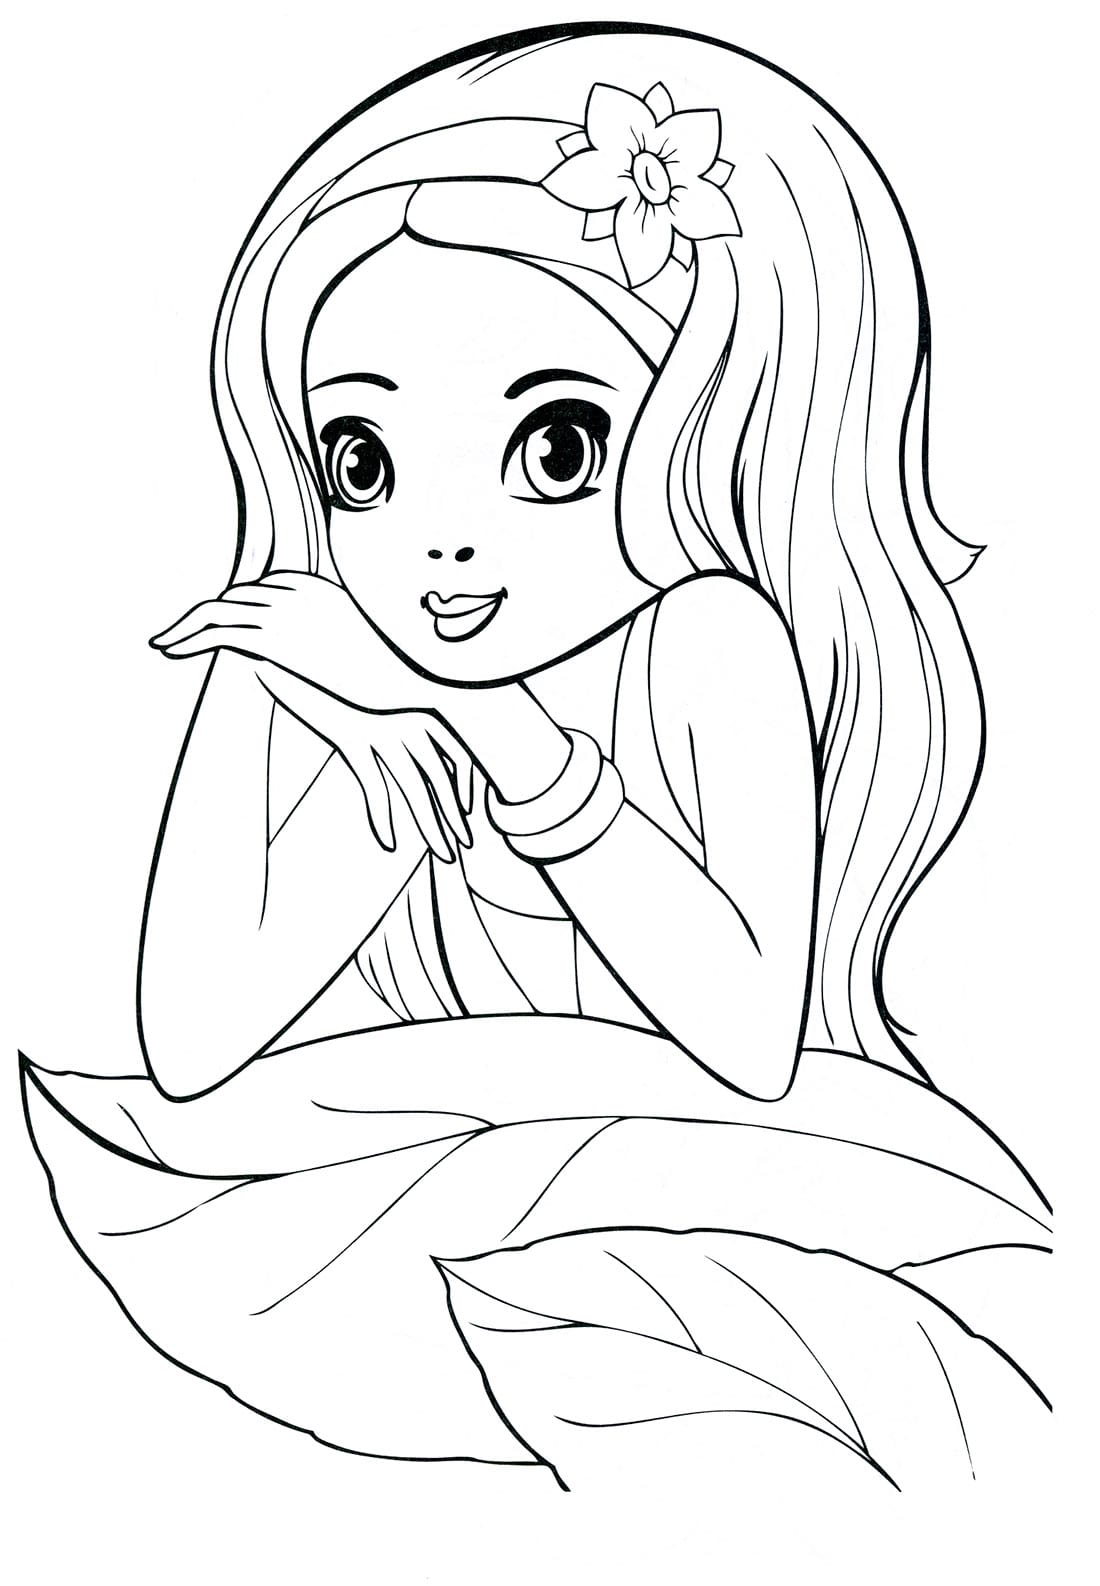 Coloring pages for girls 20 years old. Download or print for free